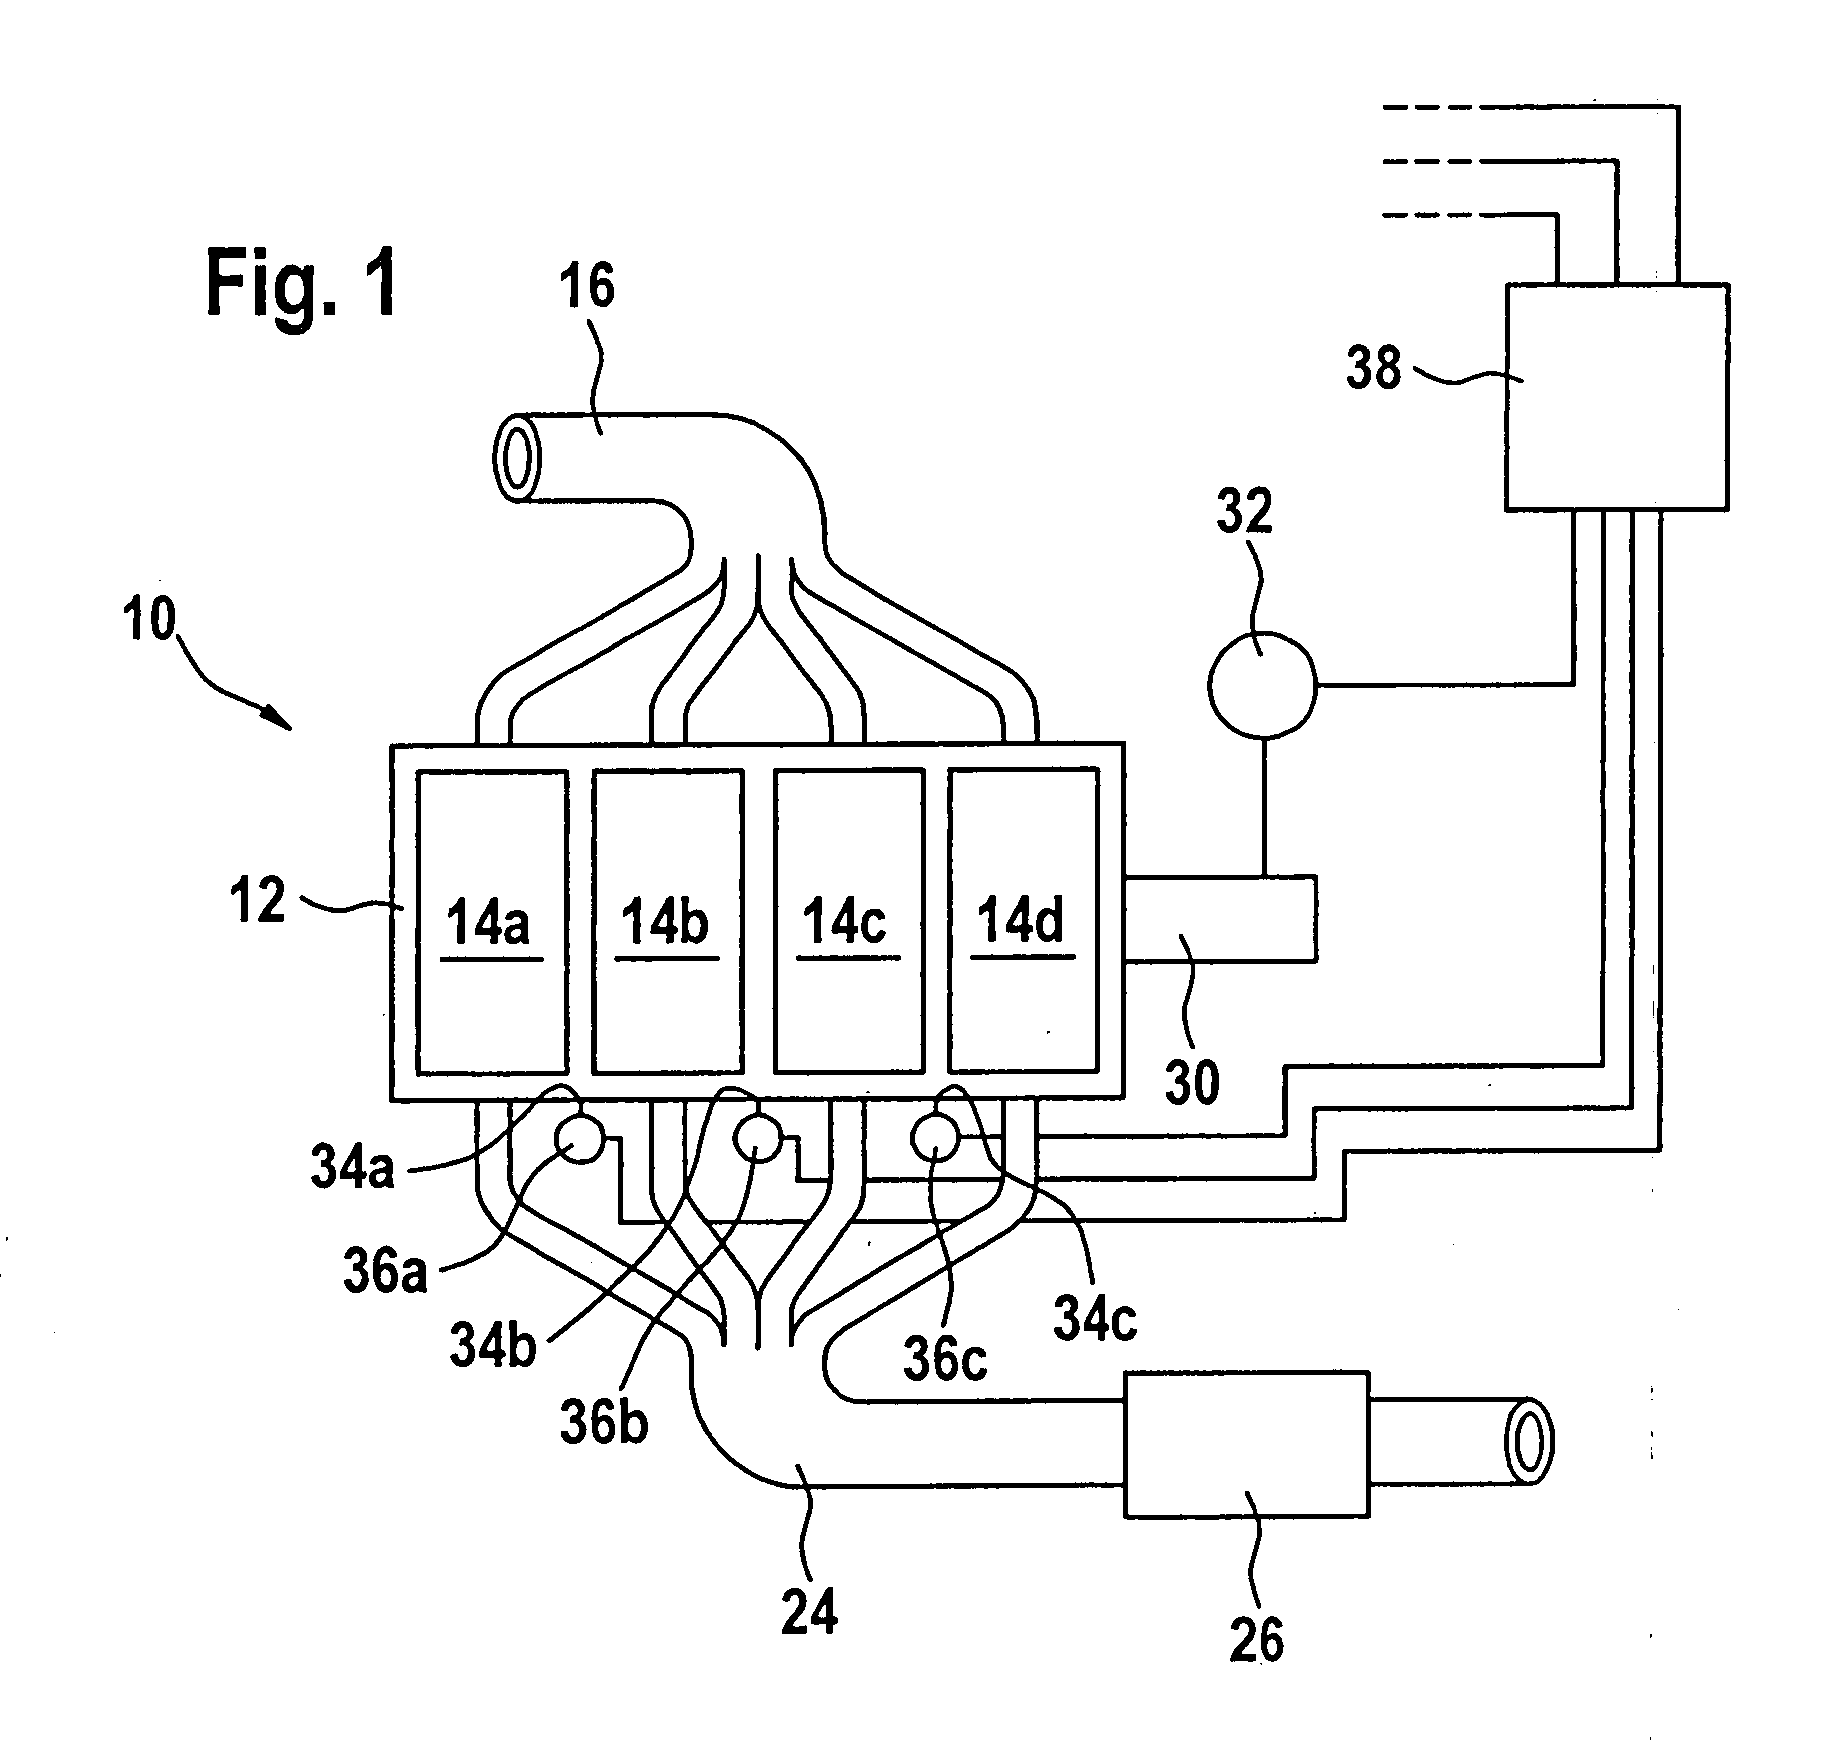 Method for ascertaining the noise emission of an internal combustion engine